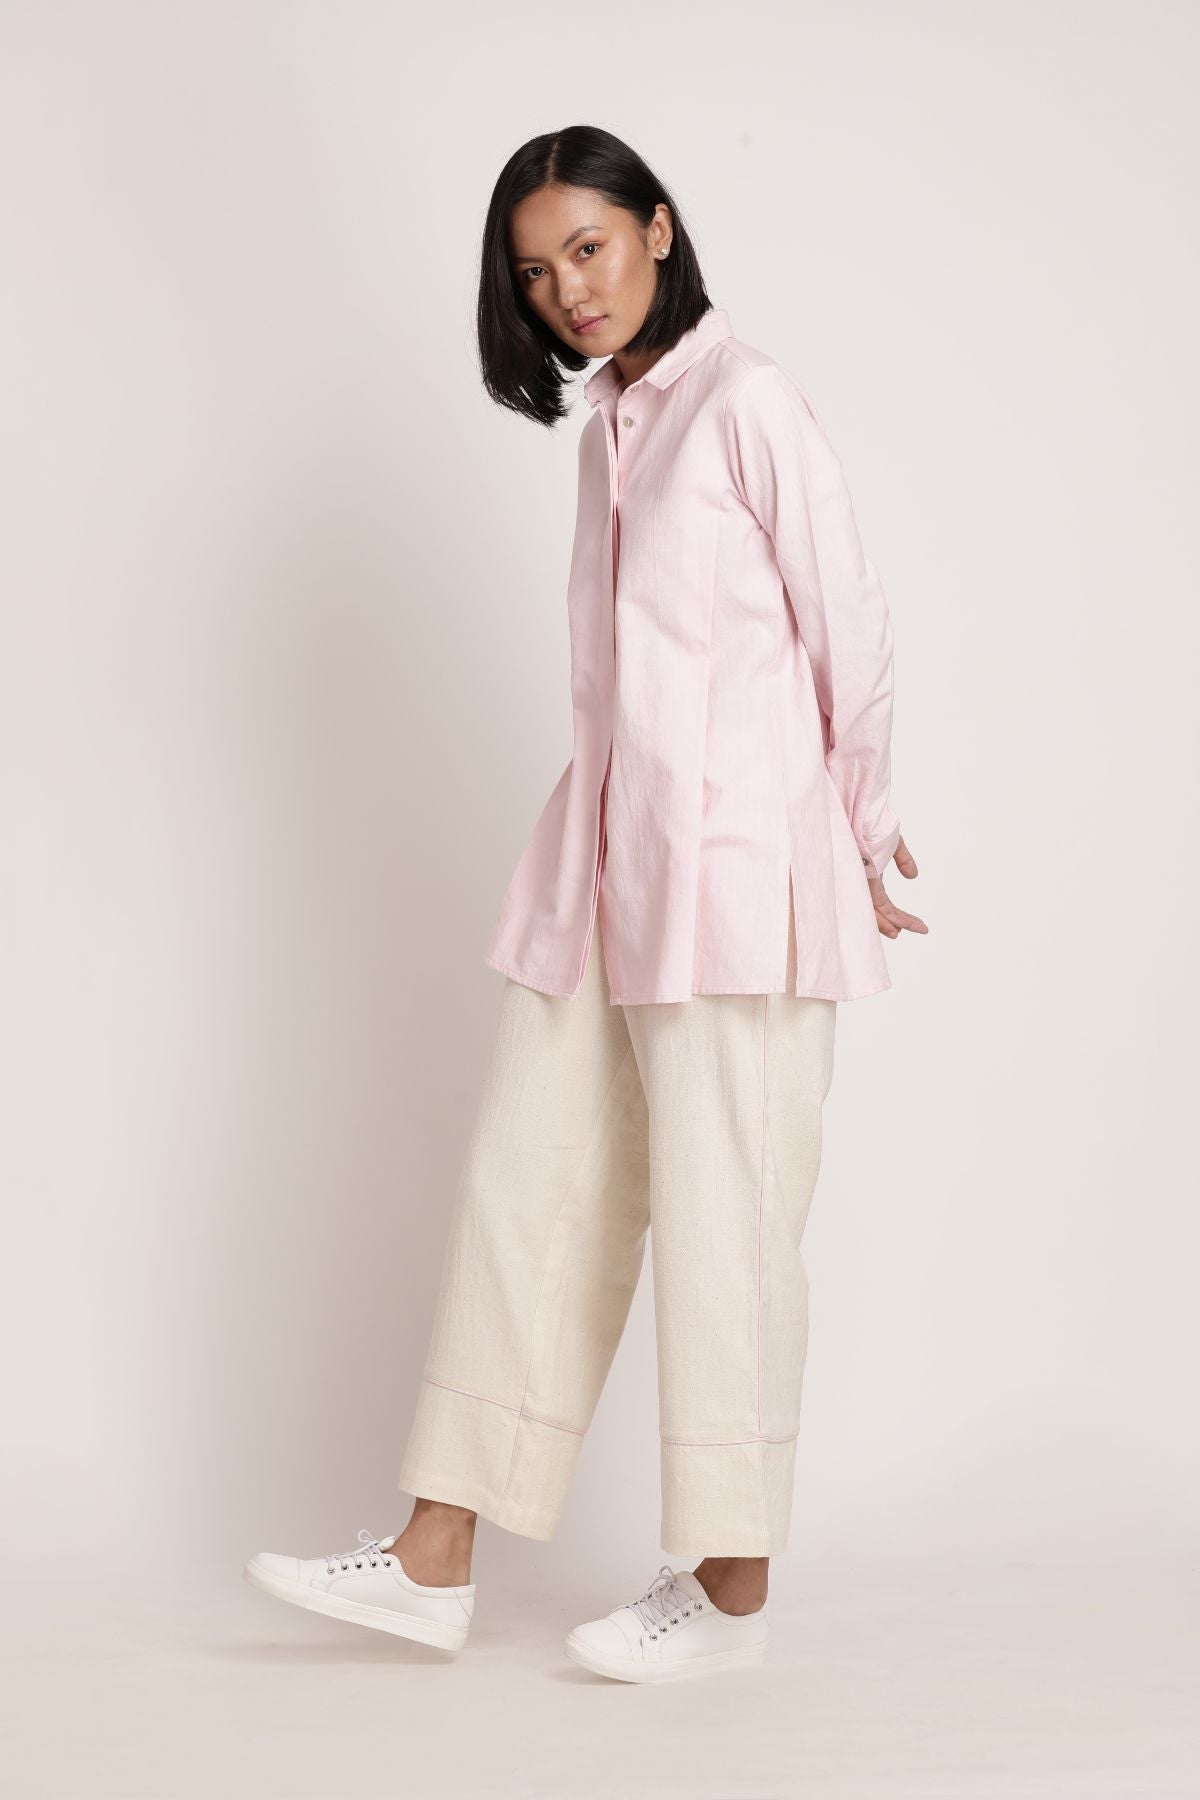 Off-white Pants by Itya with Hand Spun Cotton, Handwoven cotton, Natural, Off-white, Office Wear, Pants, Pastel Perfect, Pastel Perfect by Itya, Plant Dye, Relaxed Fit, Solids, SS22, Womenswear at Kamakhyaa for sustainable fashion